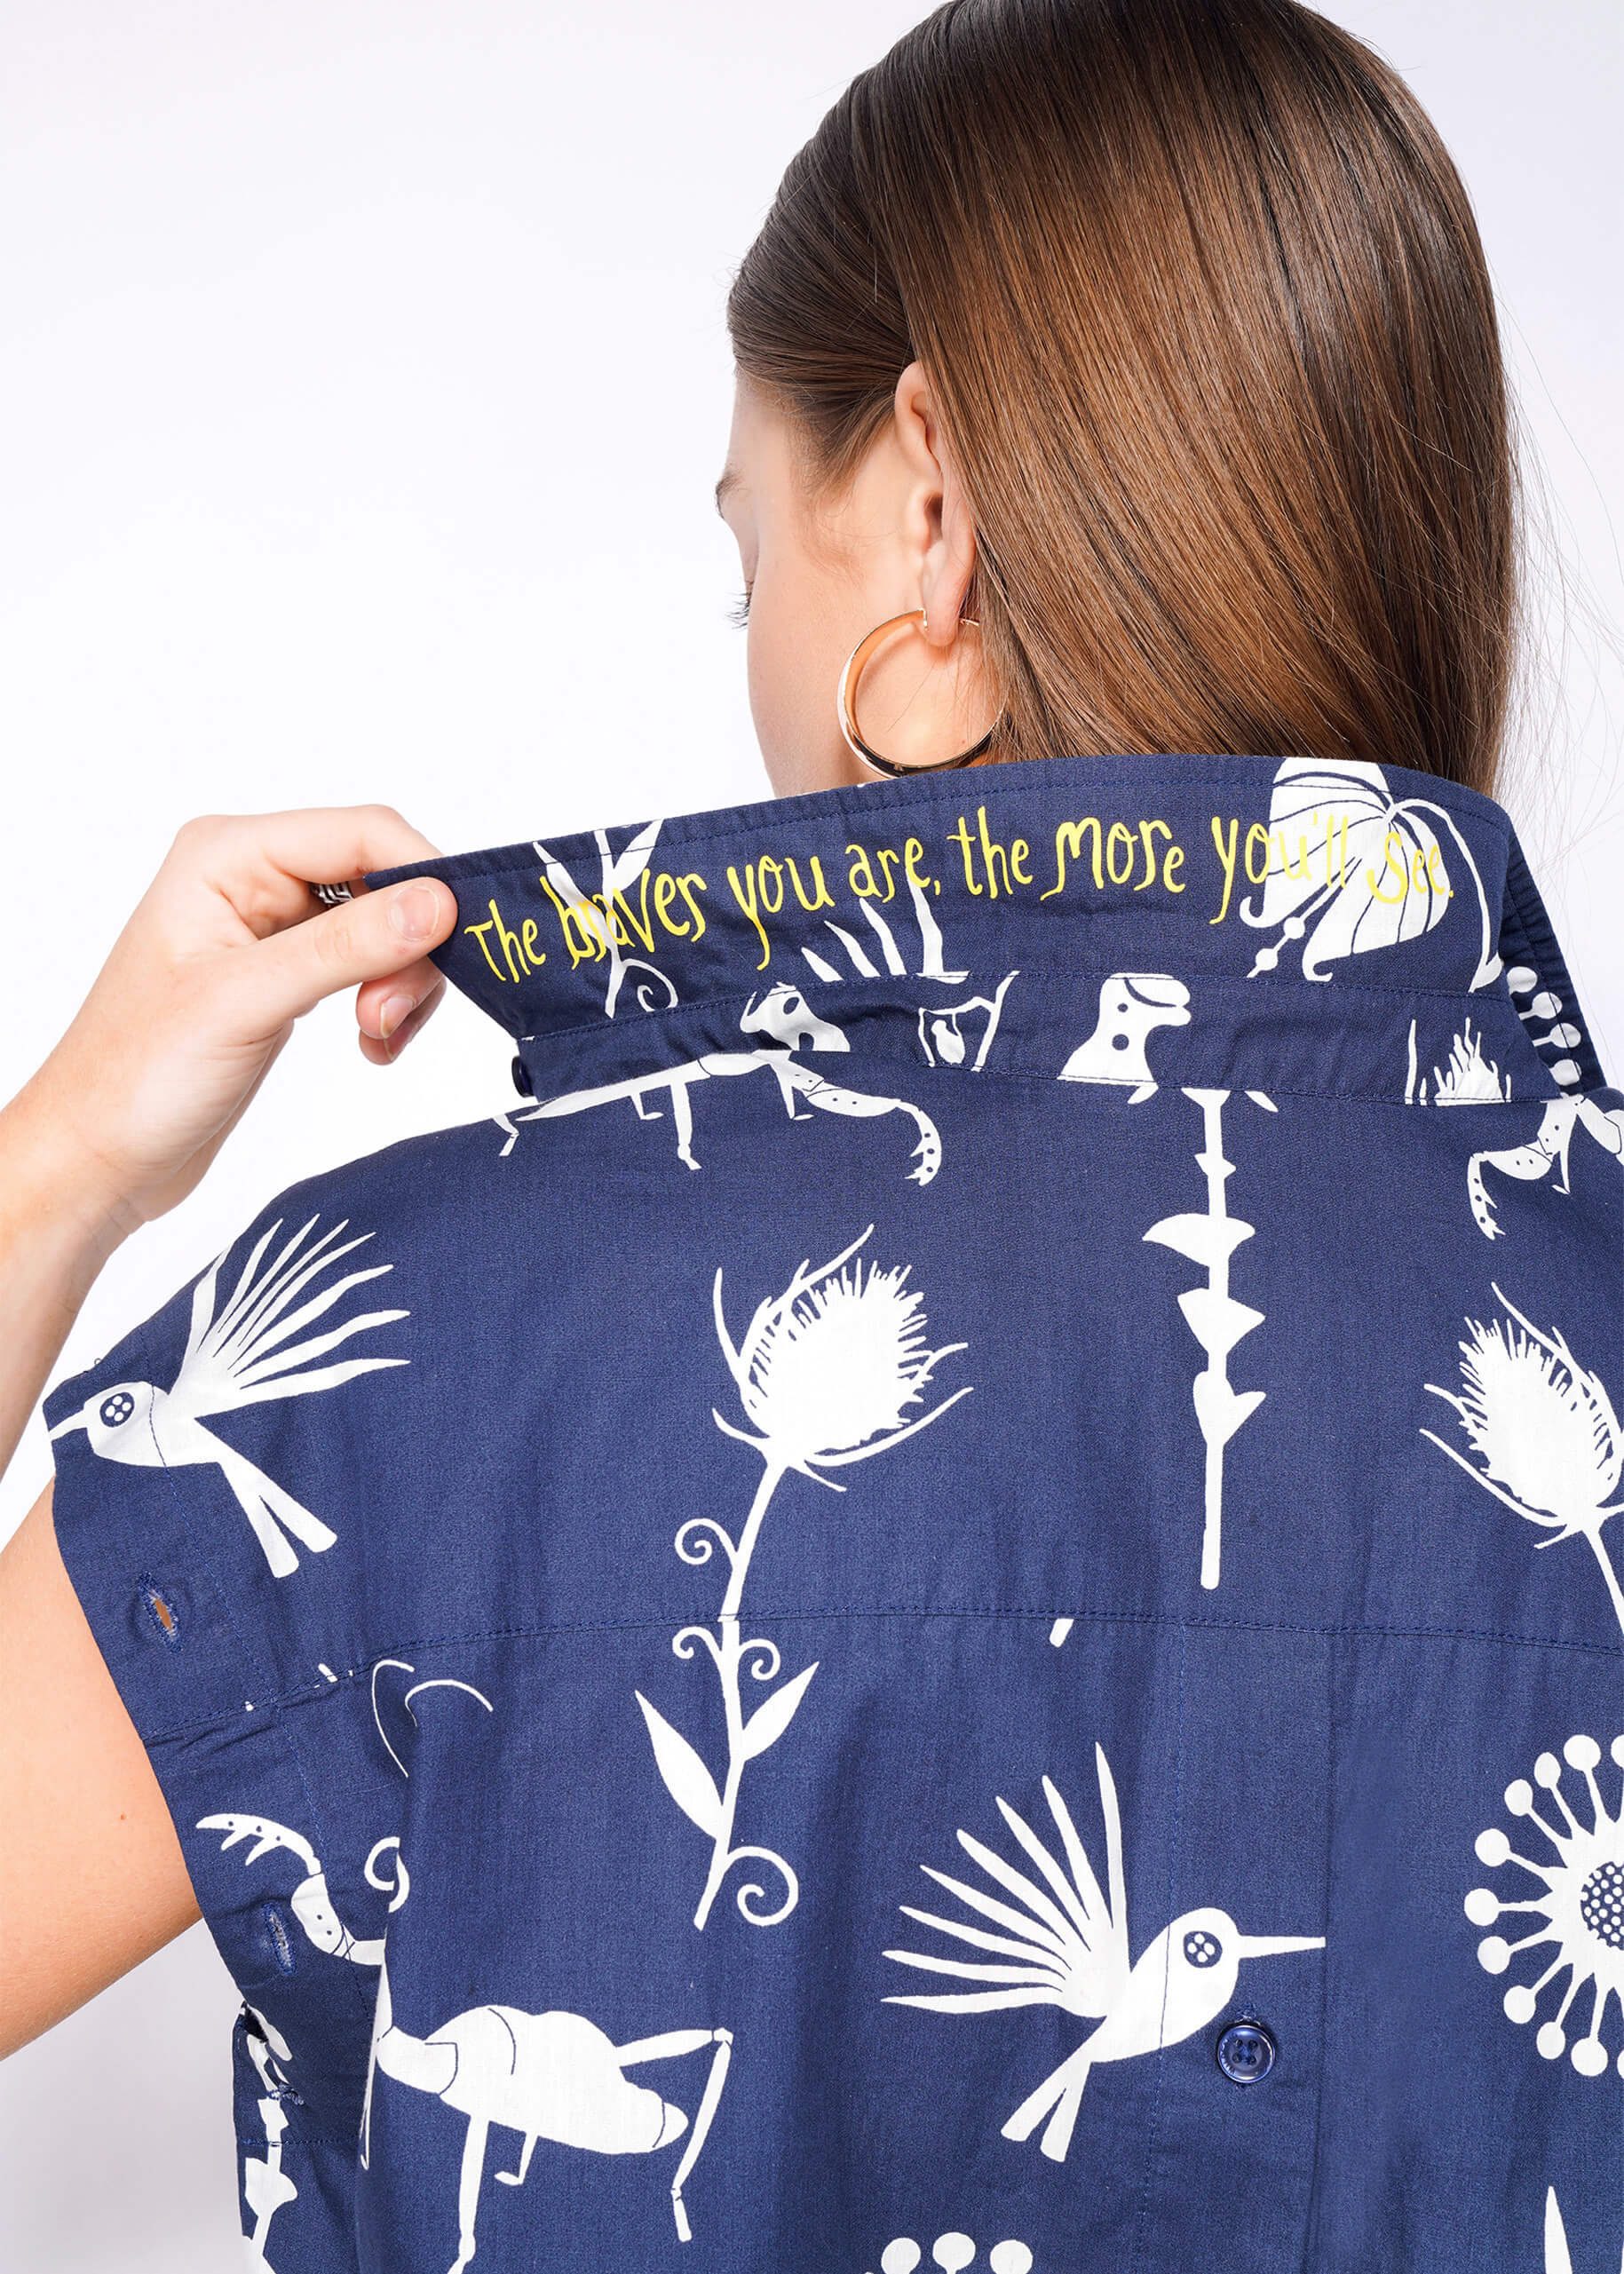 Coraline© Convertible Sleeve Button Up by Laika x Wildfang